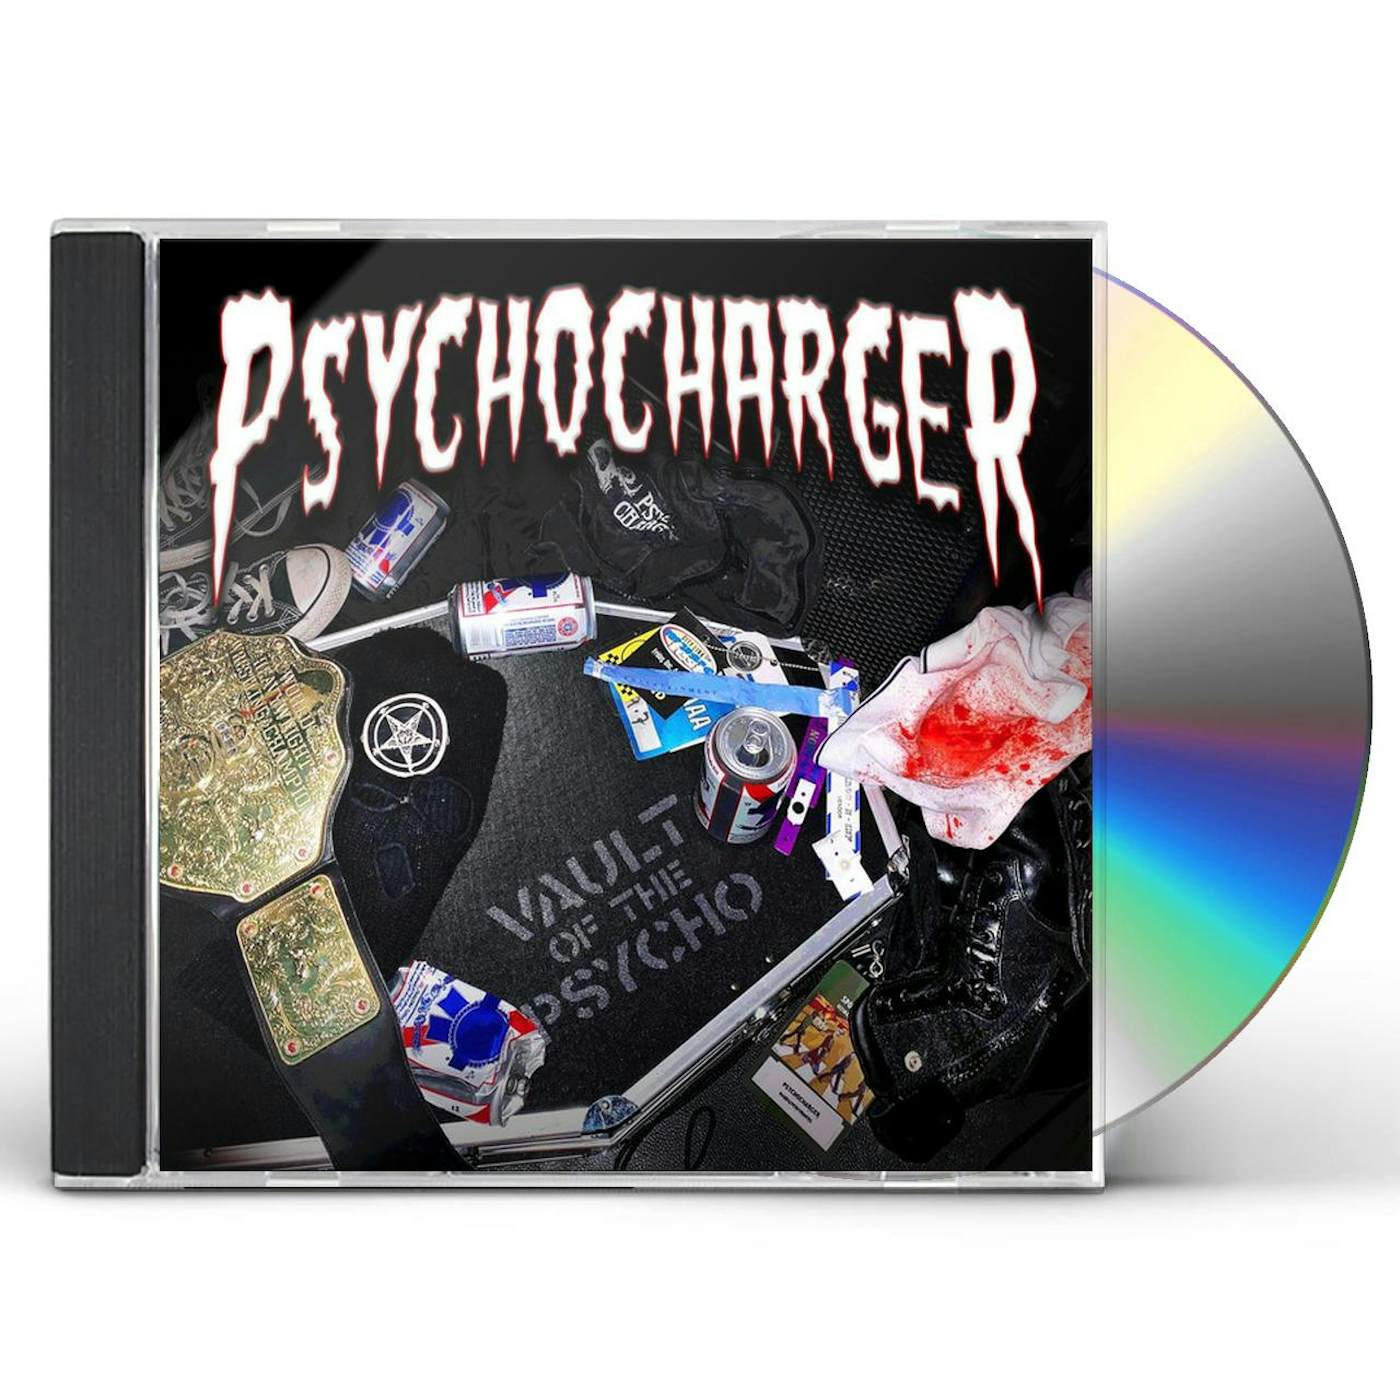 Psycho Charger VAULT OF THE PSYCHO CD